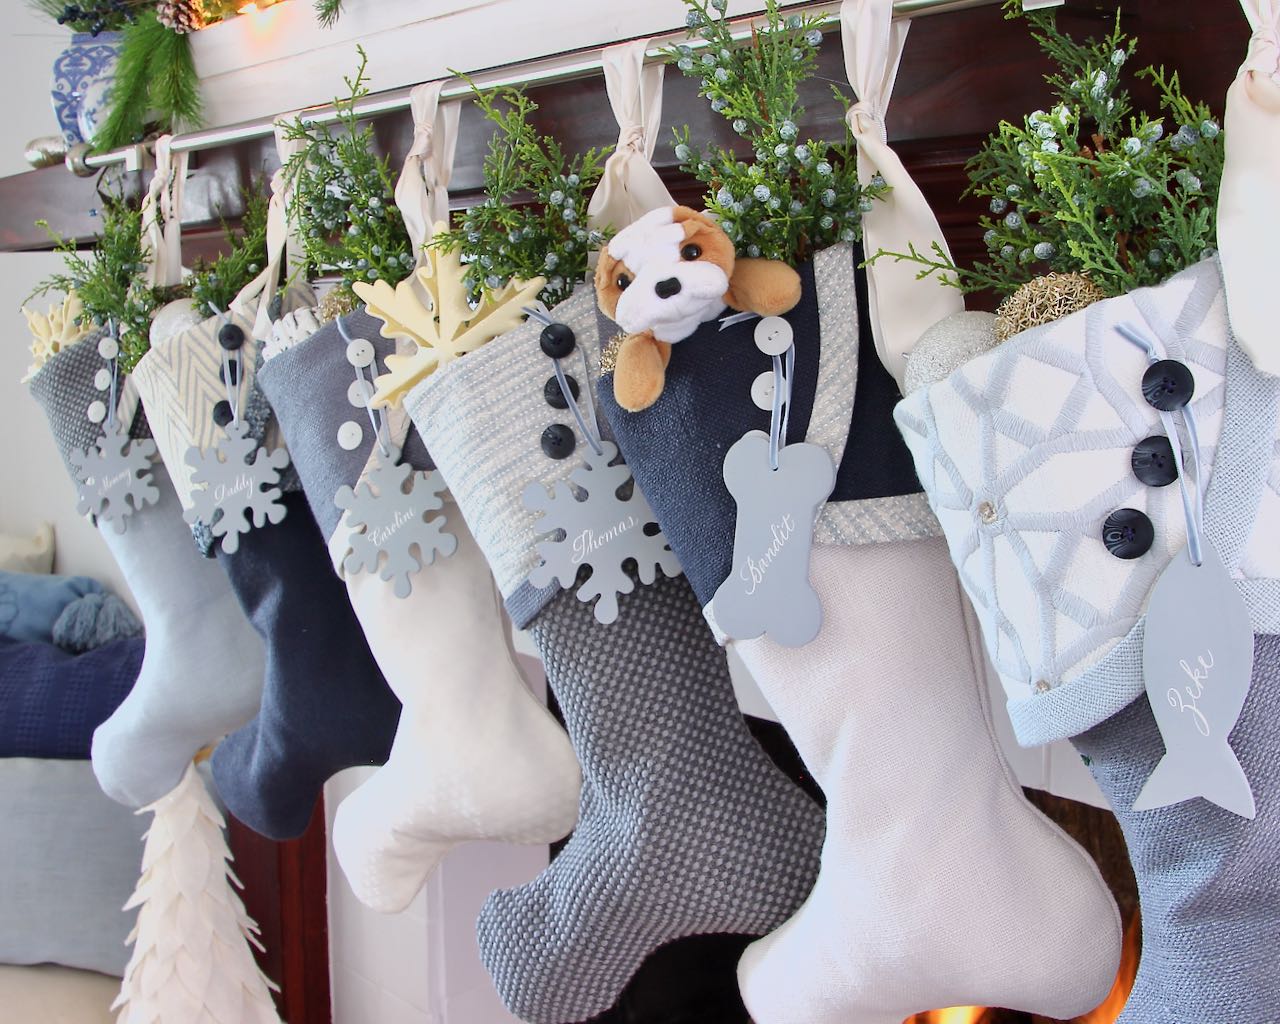 Blue Christmas Stockings hanging in a row from a dark wood mantel